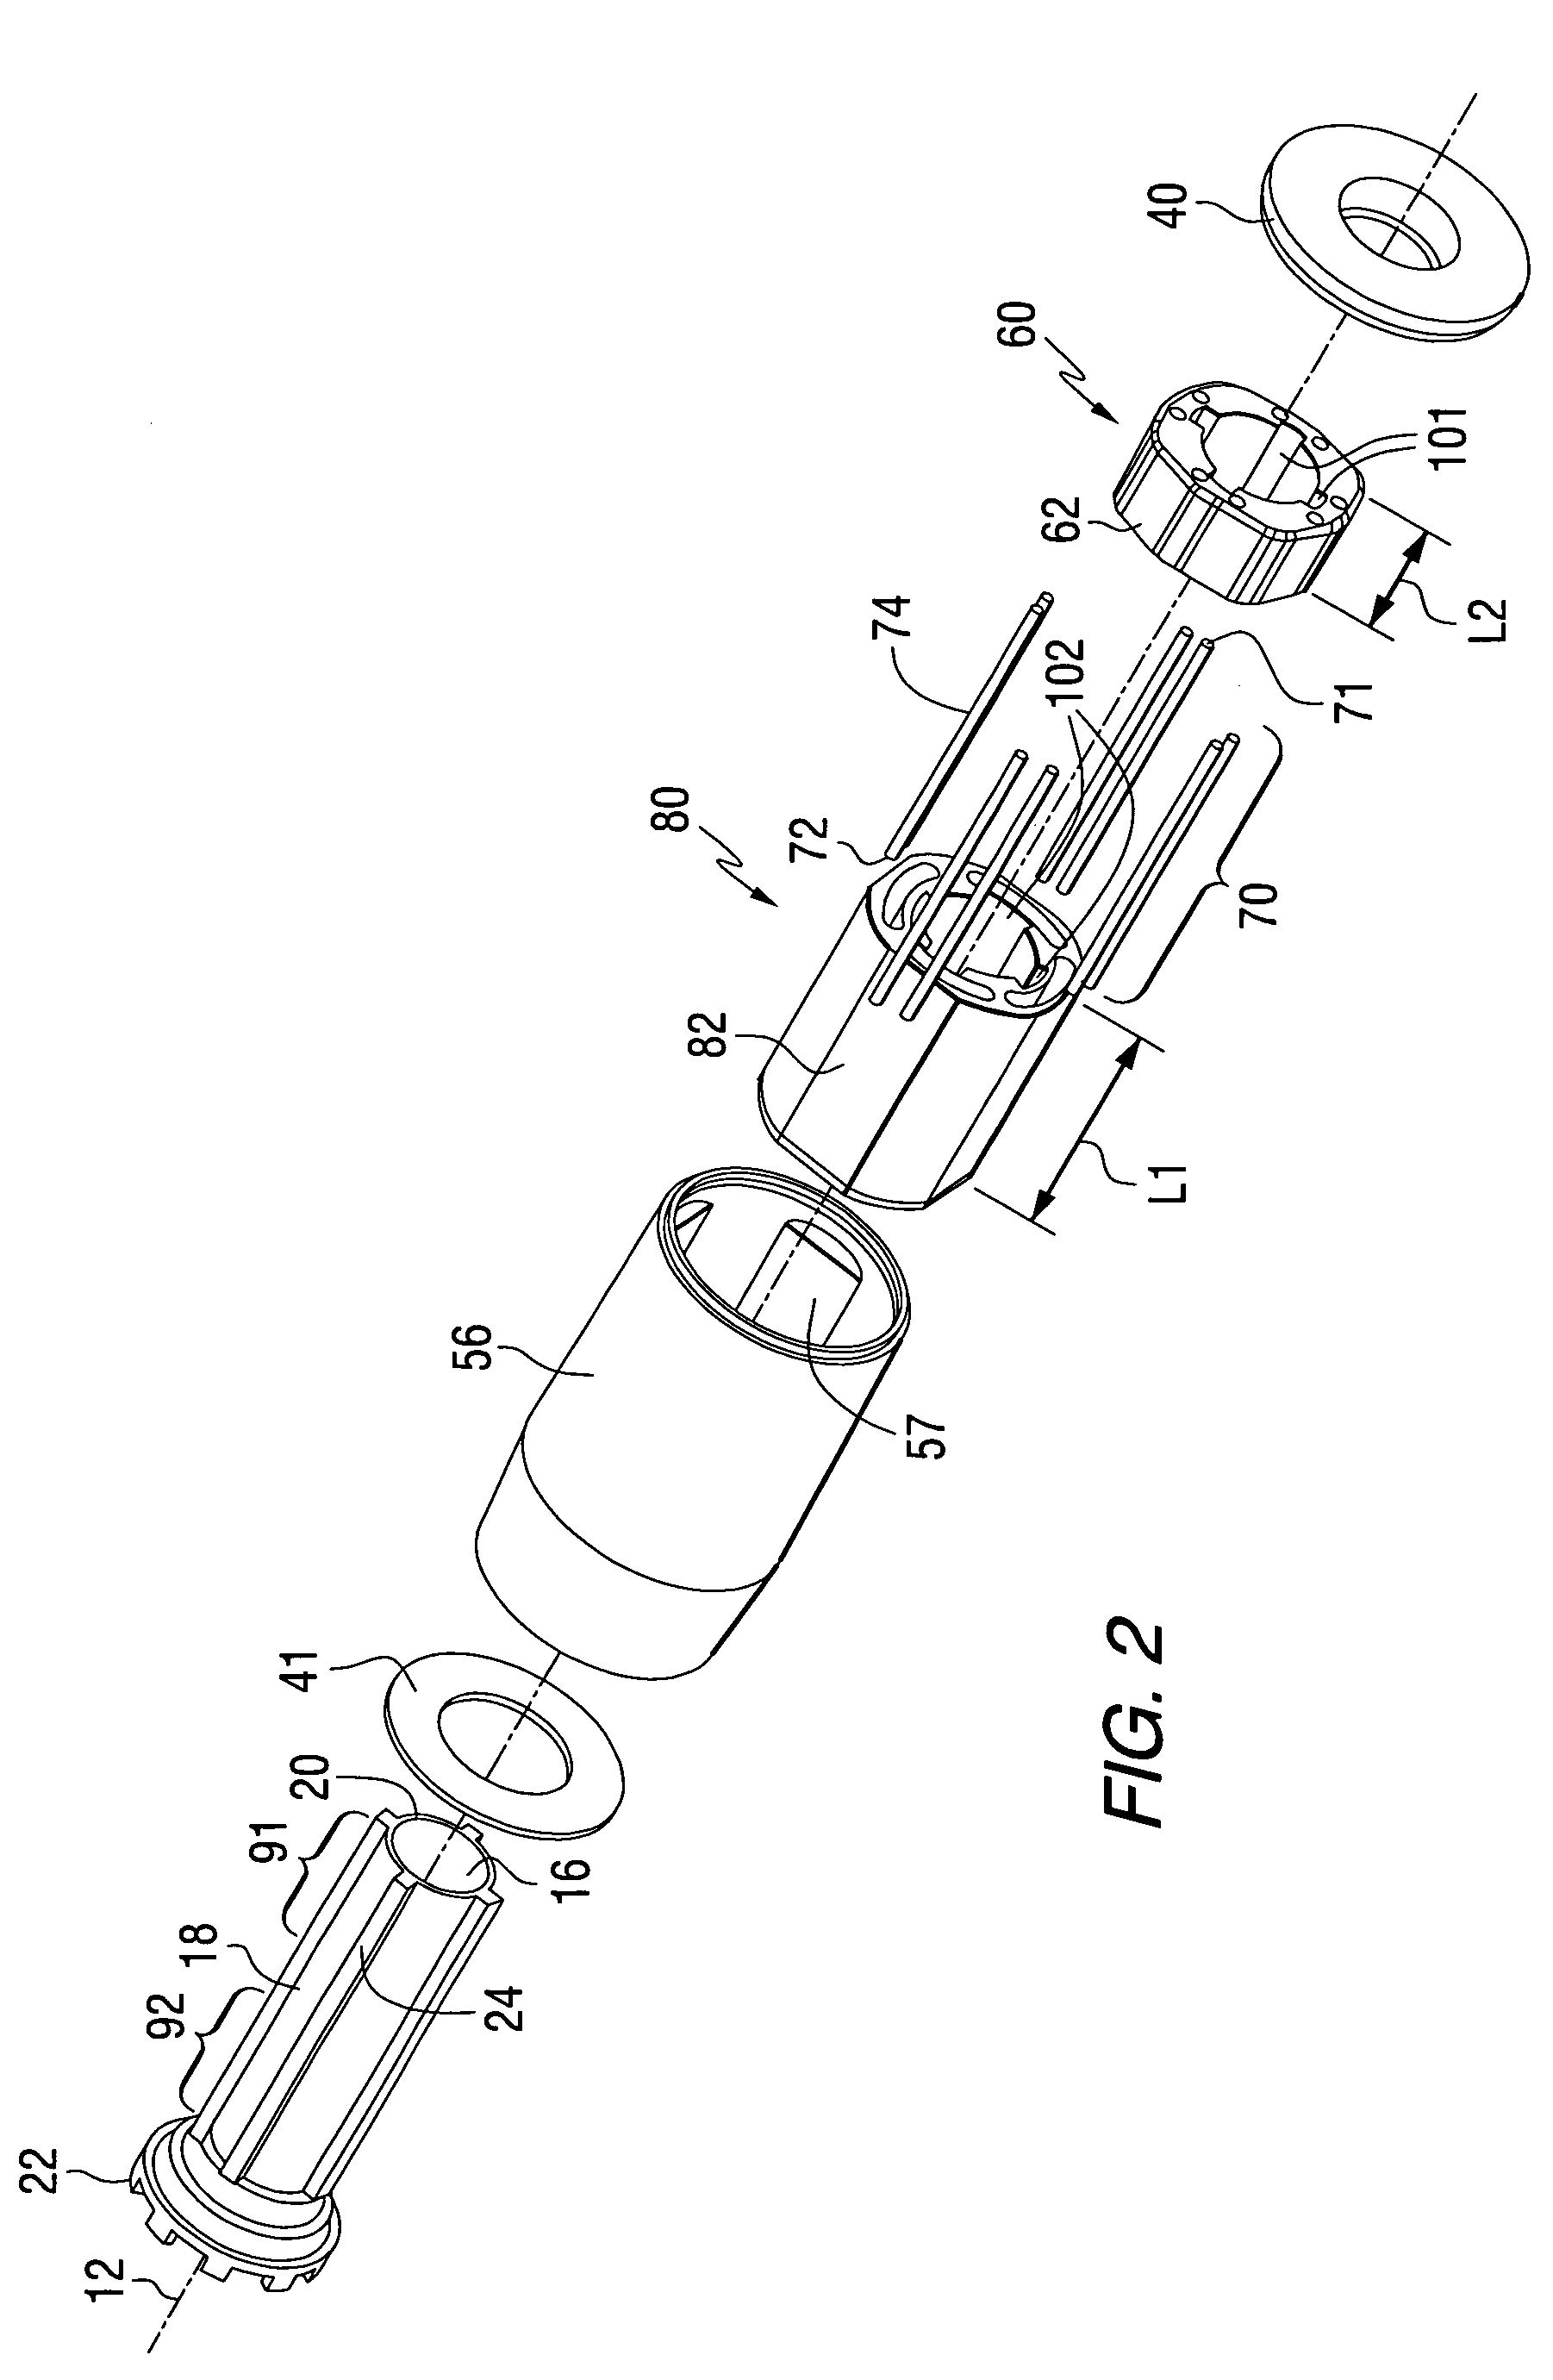 Dual rate torque transmitting device for a marine propeller